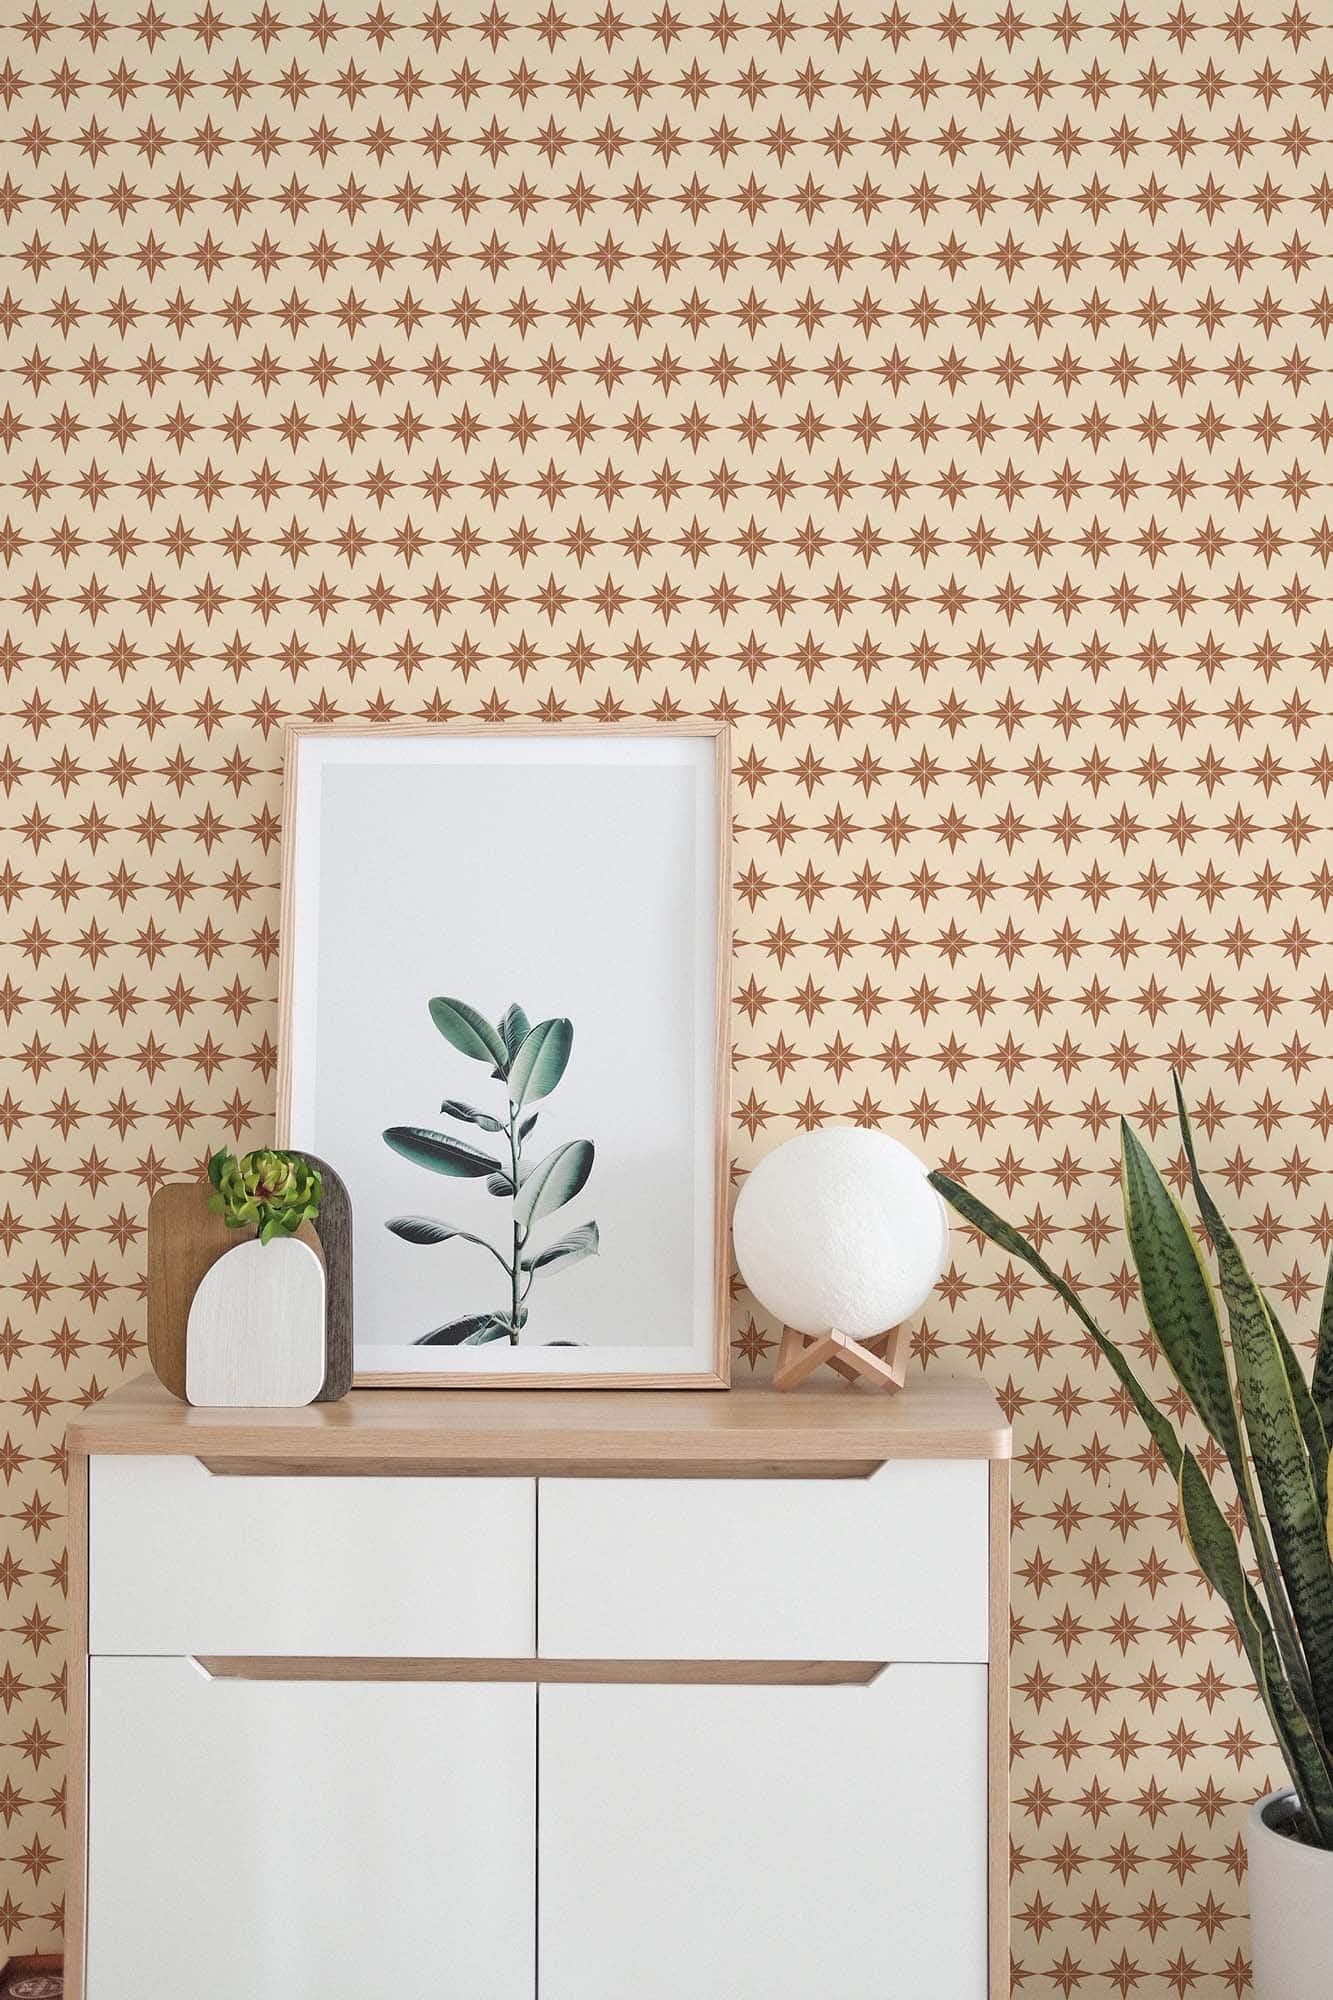 Neutral Star Wallpaper for Camper or Home - Peel and Stick or Traditional Wallpaper